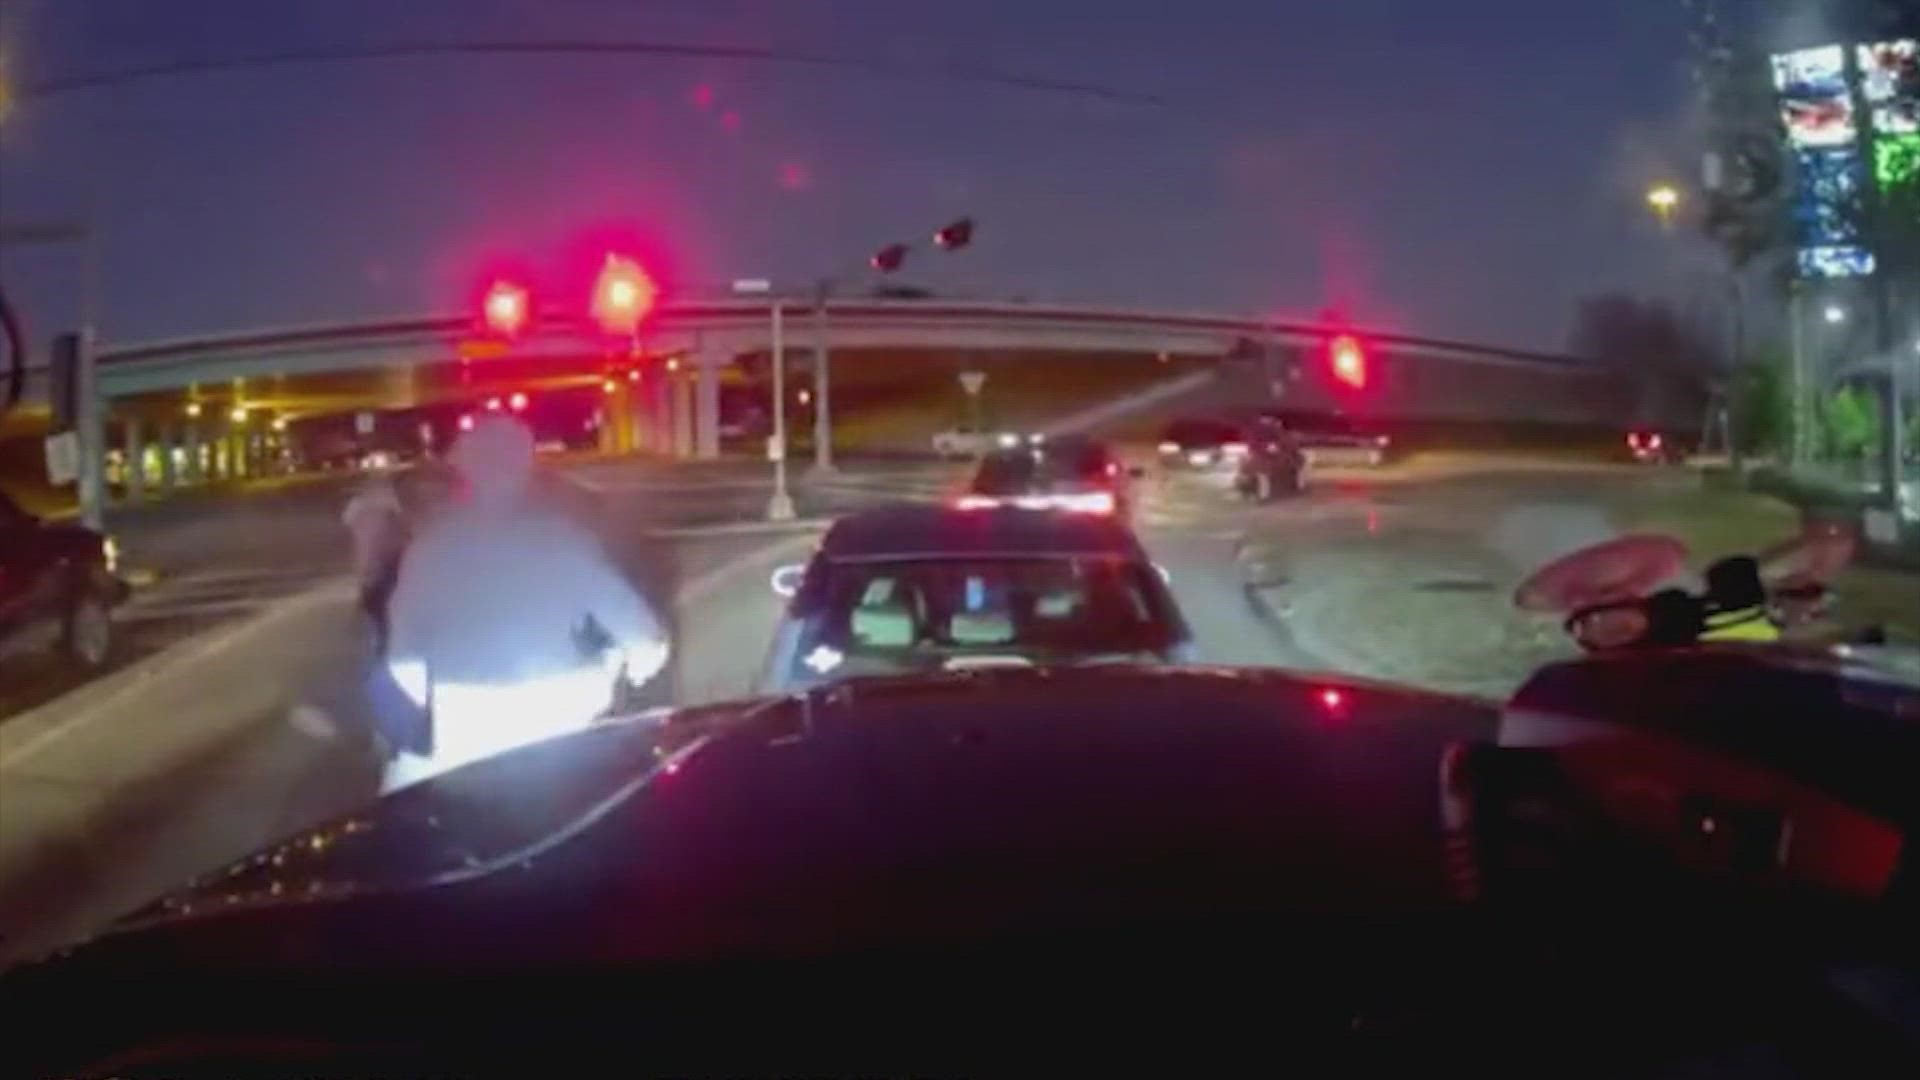 This incident happened on the Tomball Parkway in the Houston area on Jan. 14.